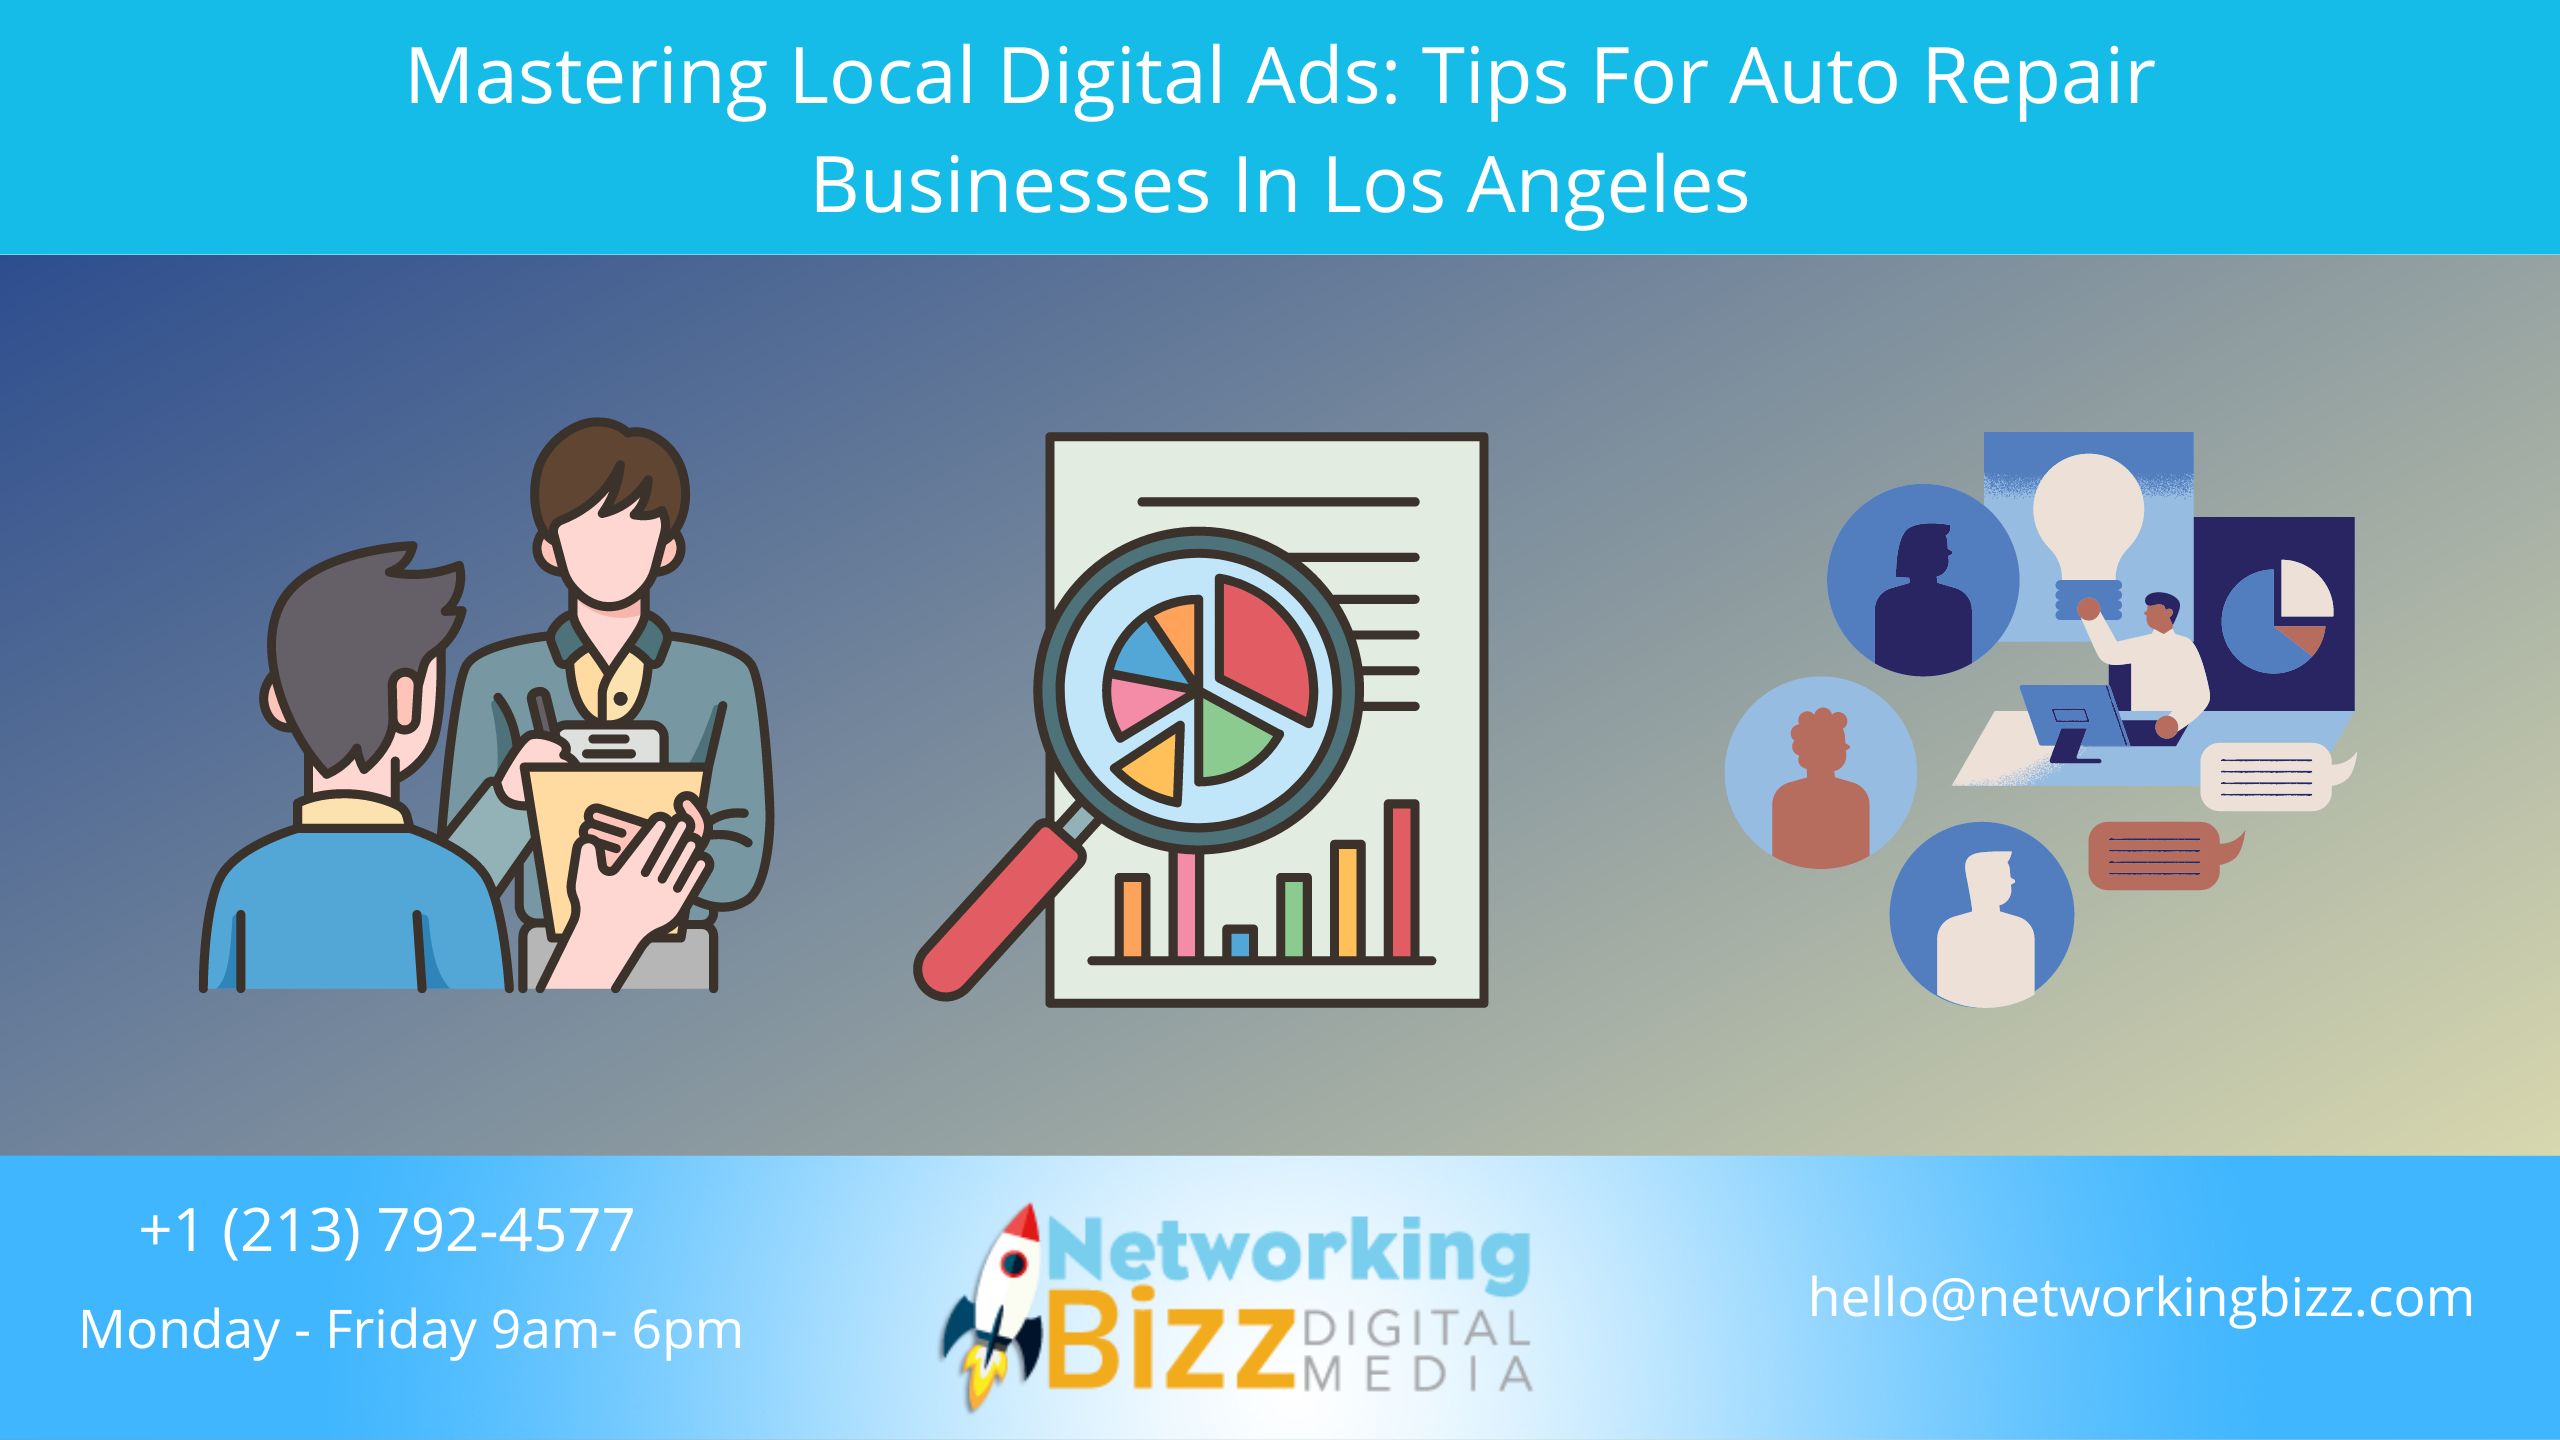 Mastering Local Digital Ads: Tips For Auto Repair Businesses In Los Angeles